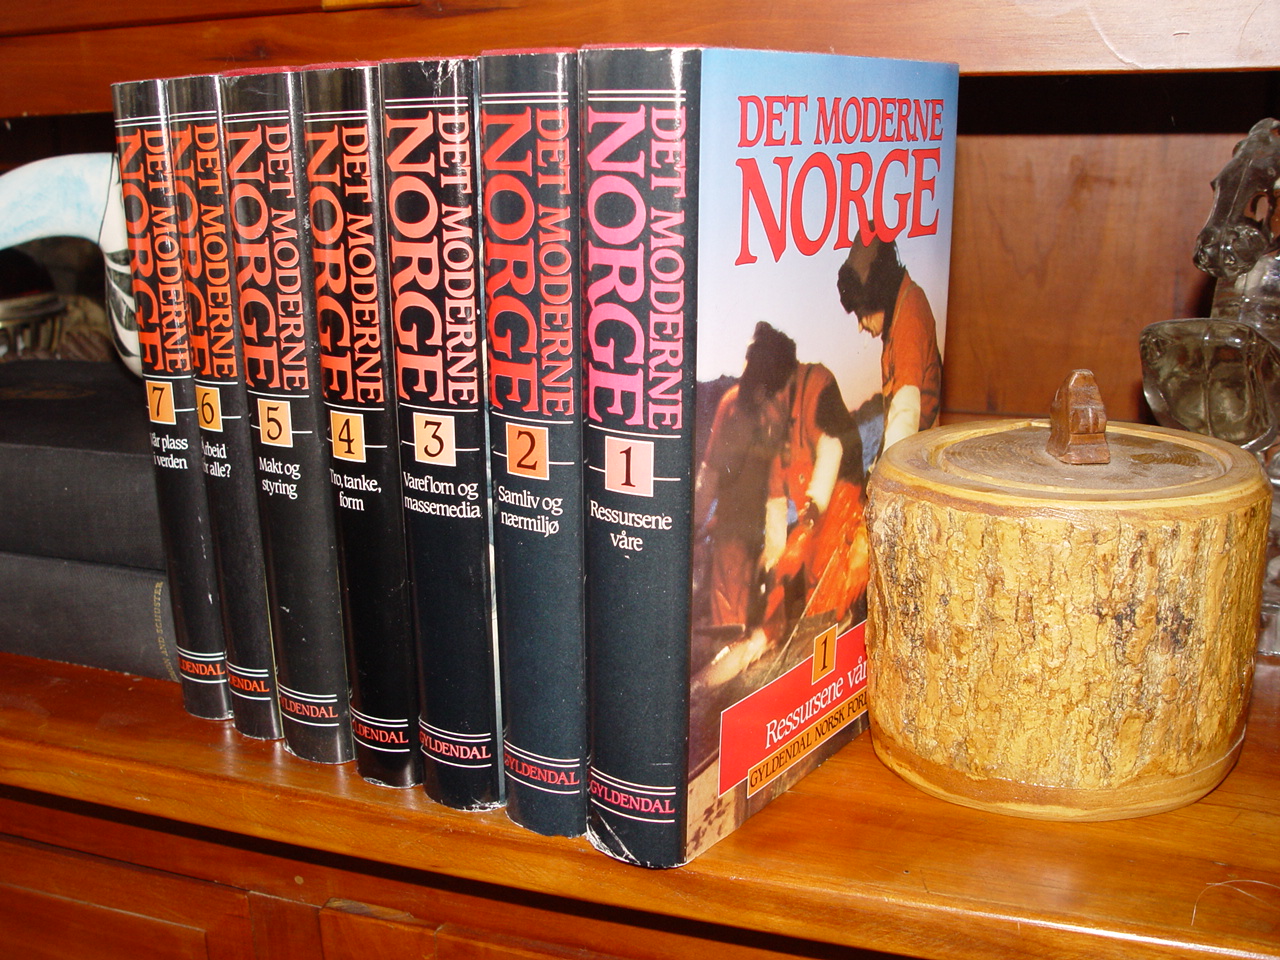 Modern Norway:
                        Our resources, 7 volumes. Det moderne Norge